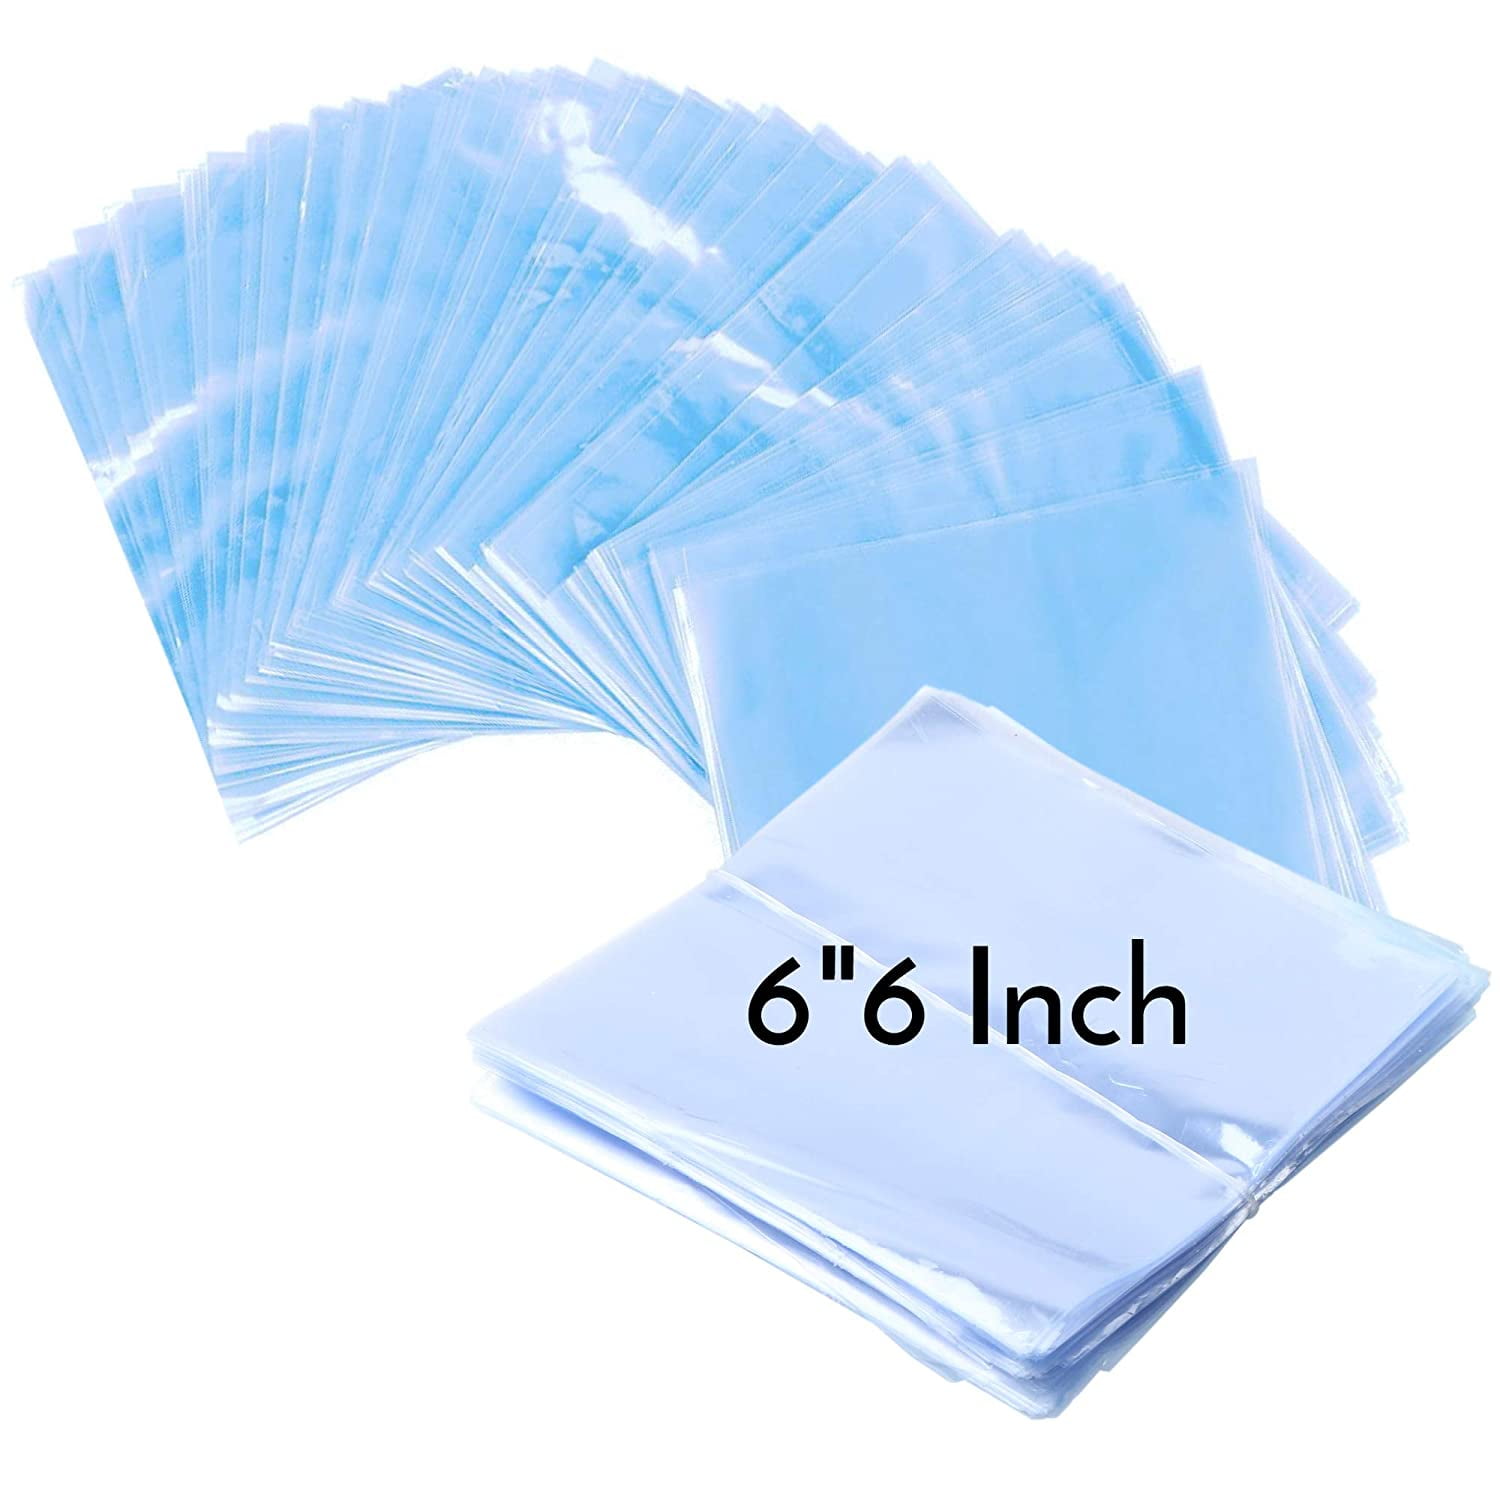 HOOT  PVC Shrink Wrap Bags Heat Sealing Film Wrapping For Soap Book Bath Bombs 